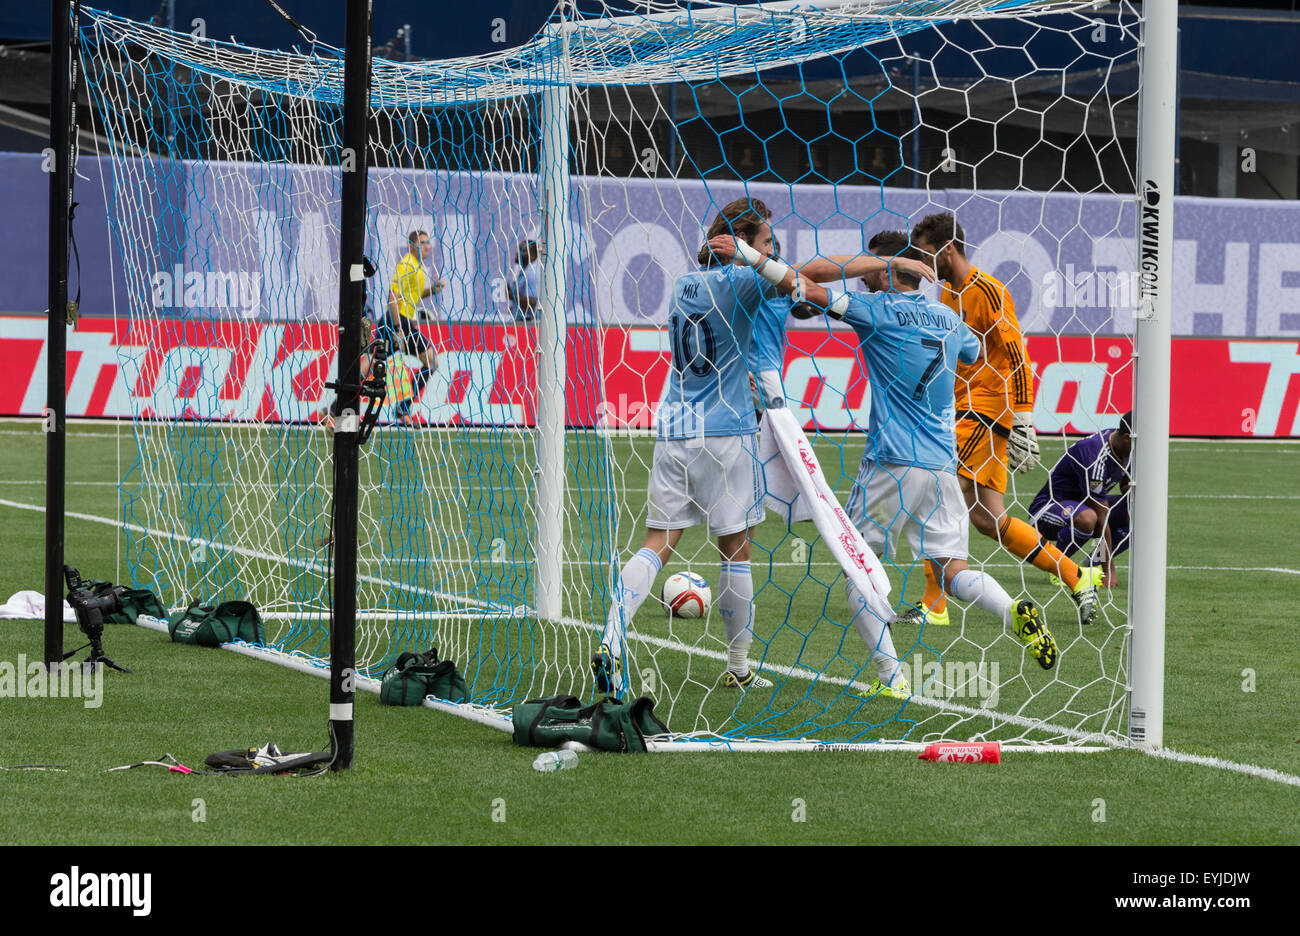 New York, NY - July 26, 2015: Mix Diskerud (10) of NYCFC celebrate goal during game between New York City Football Club and Orlando City SC at Yankee Stadium Stock Photo